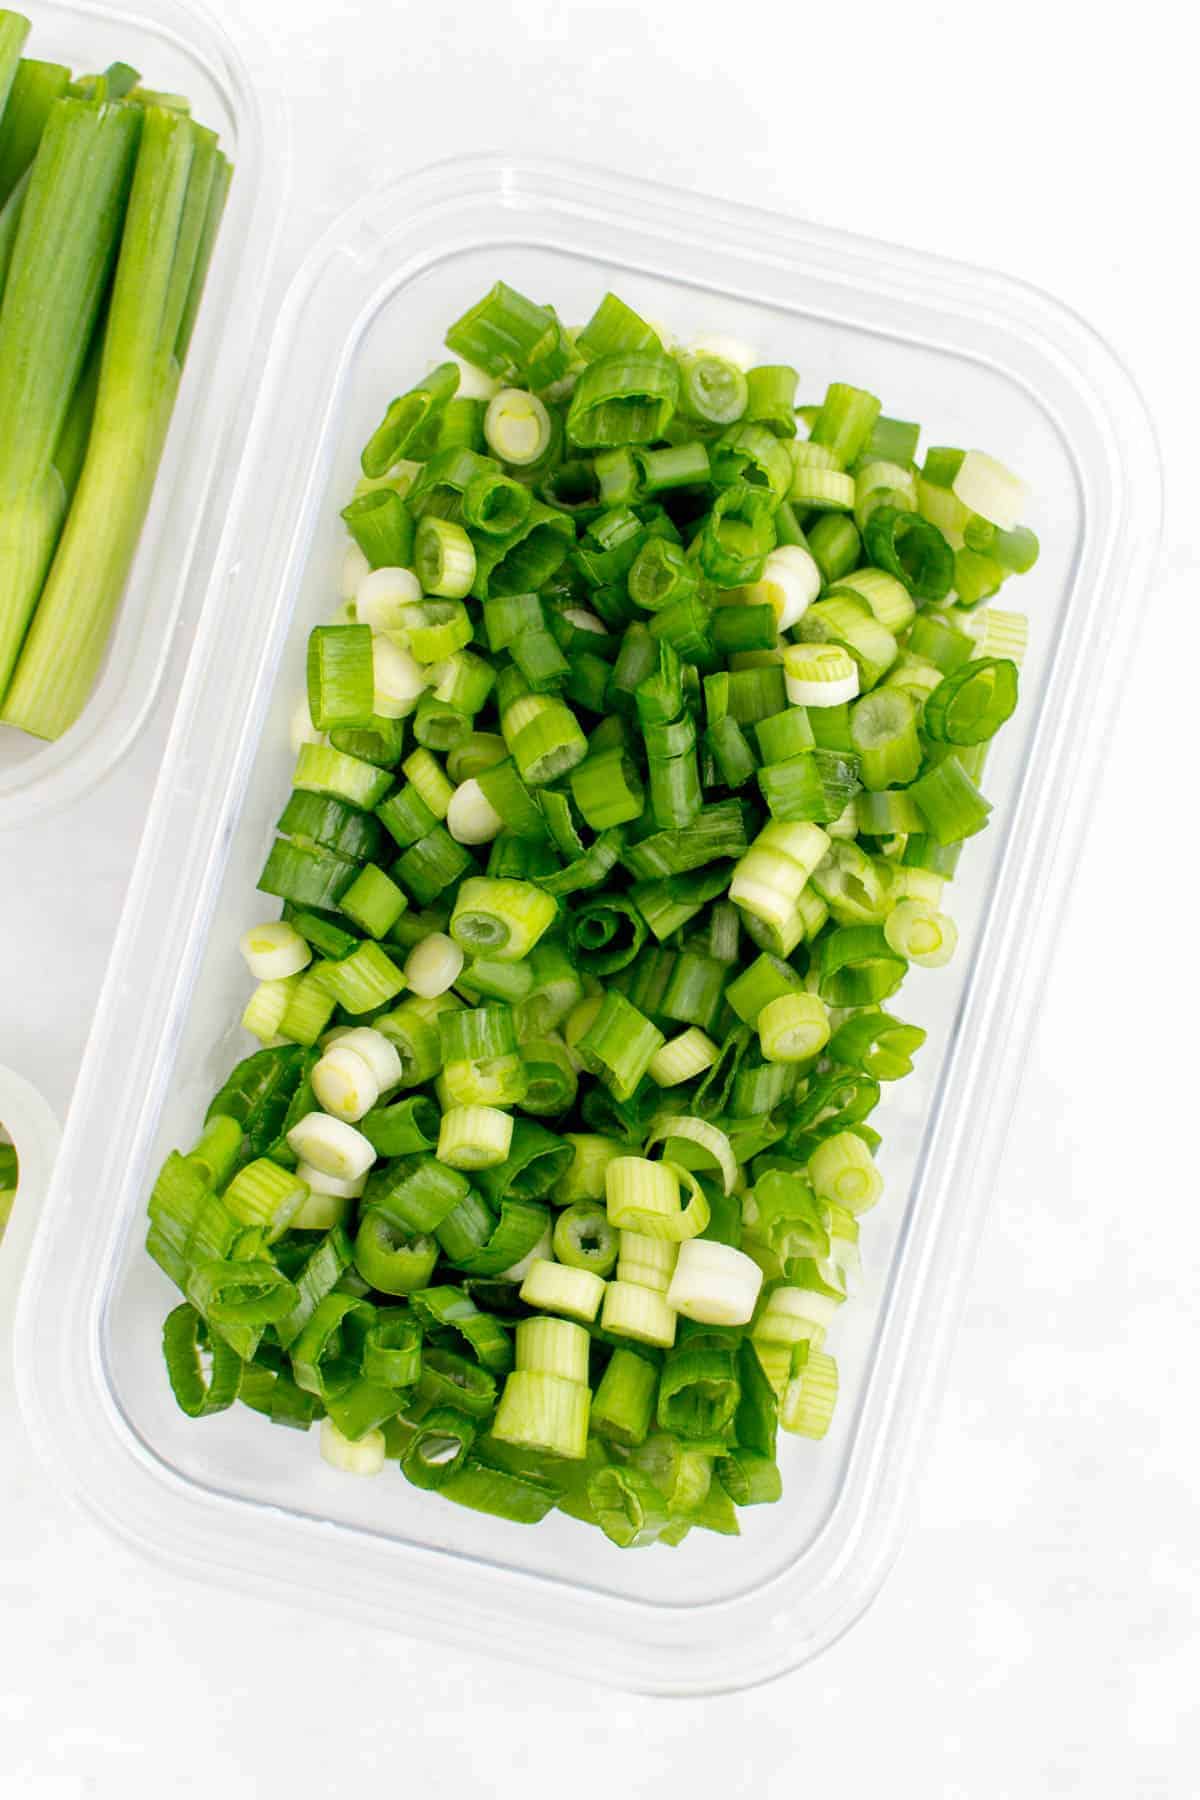 How to Cut Green Onions and Store Them So They Stay Fresh